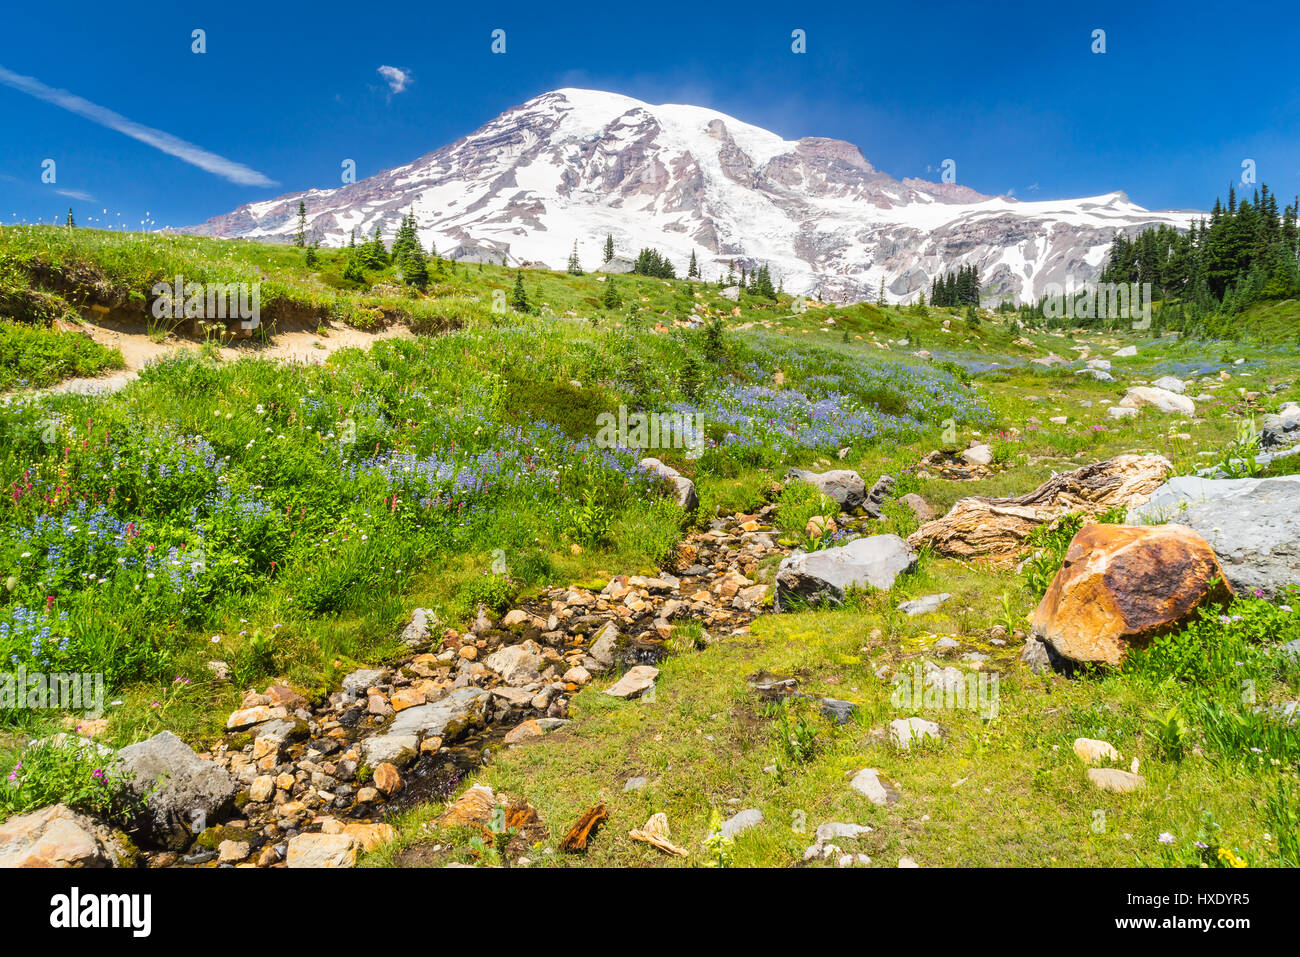 Mount Rainier, Washington with field of wildflowers and stream in foreground. Stock Photo